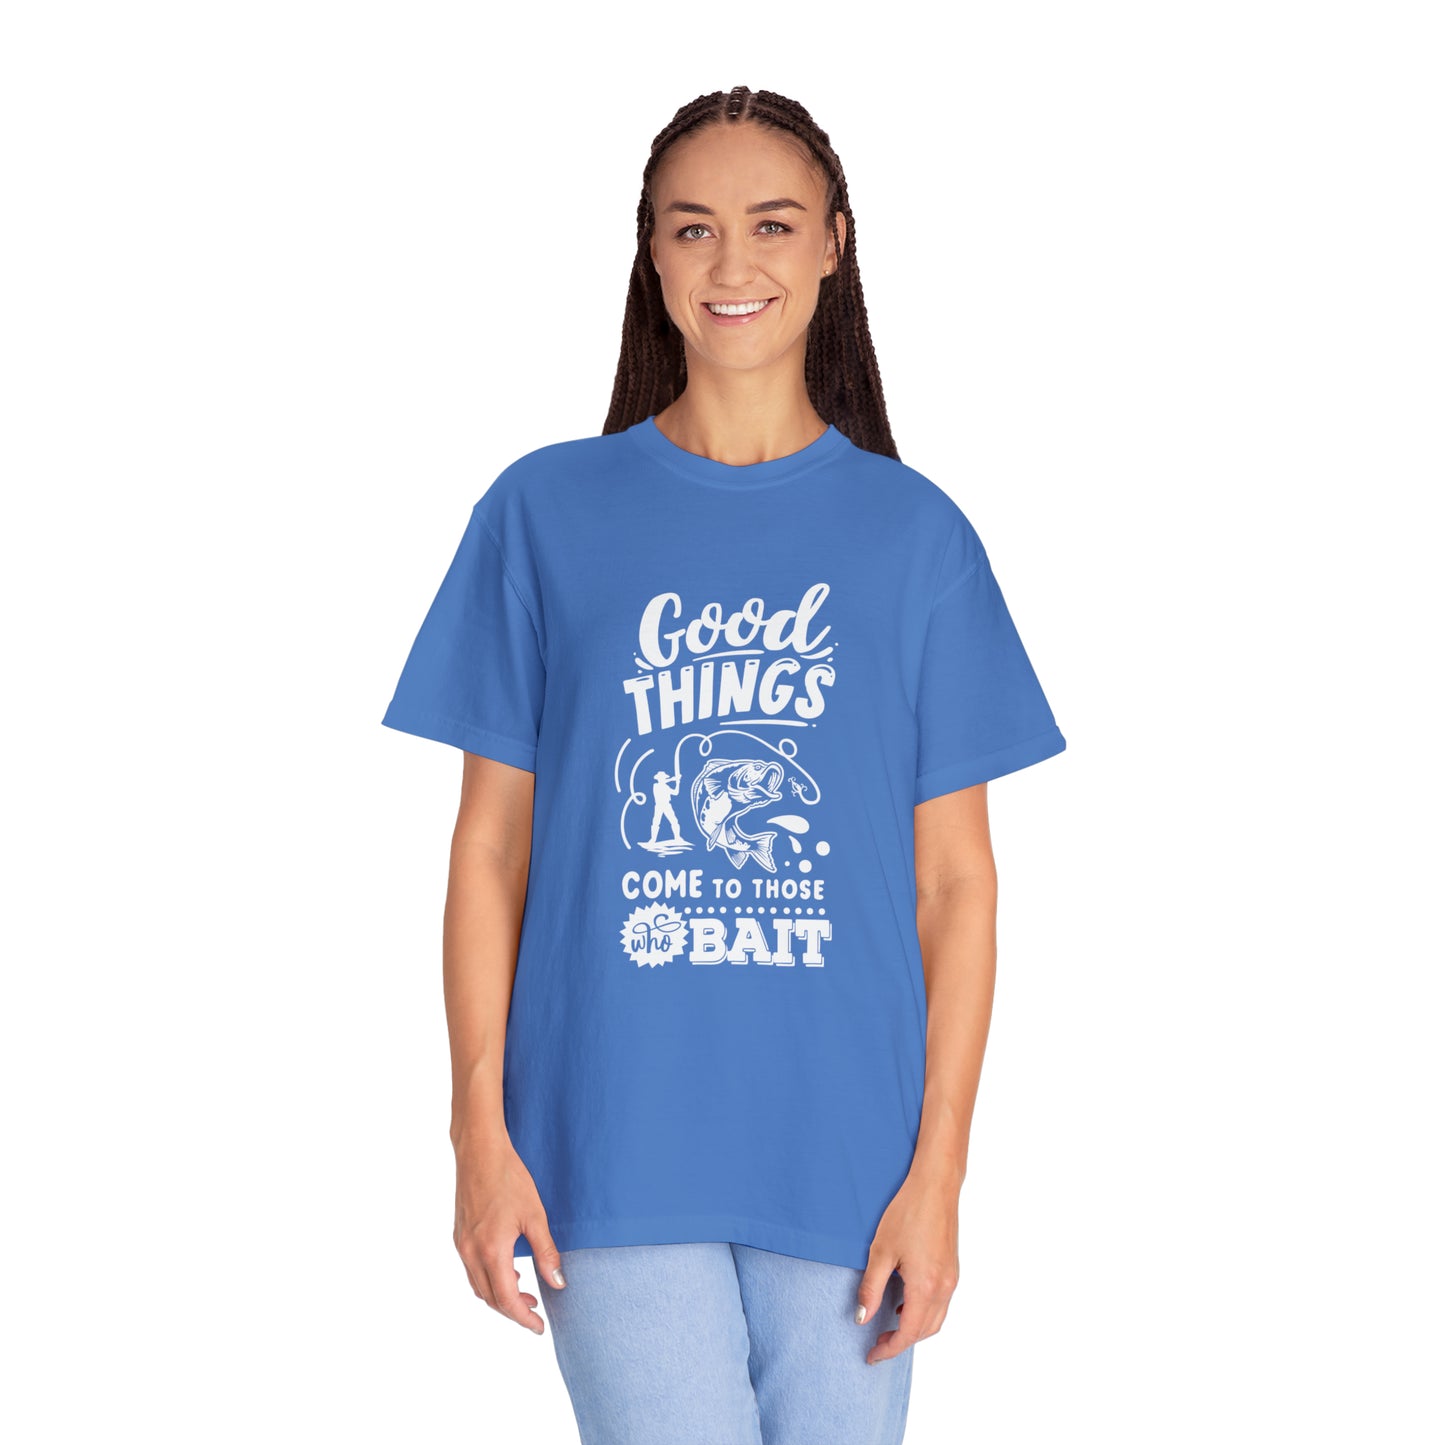 "Good Things Come to Those Who Bait" T-Shirt